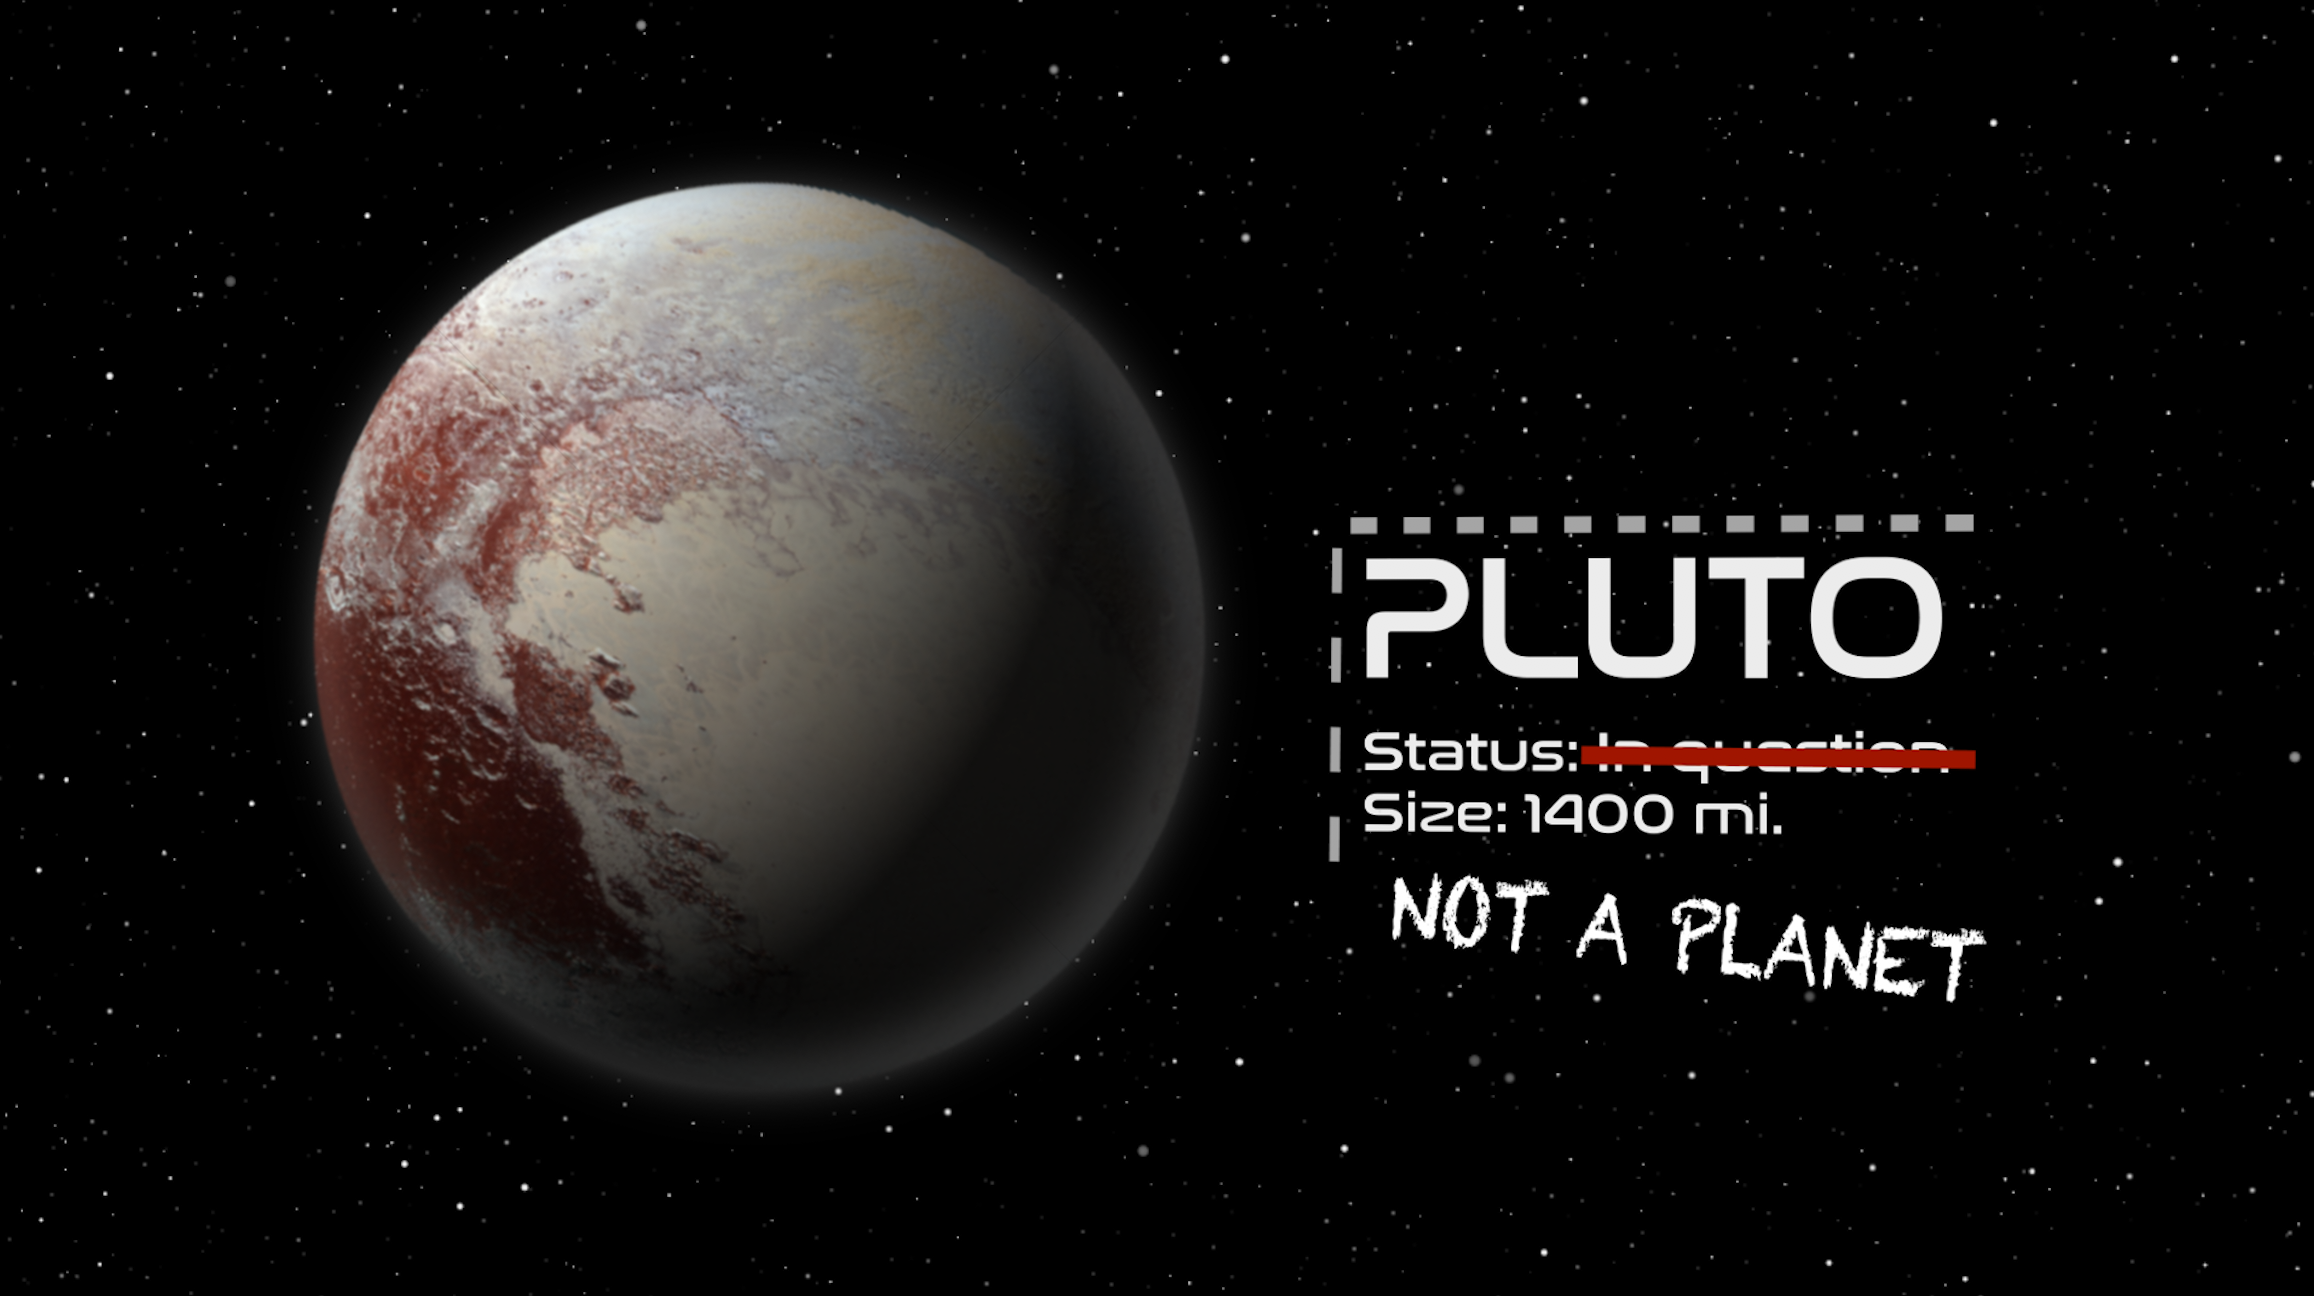 What Happened to Pluto?